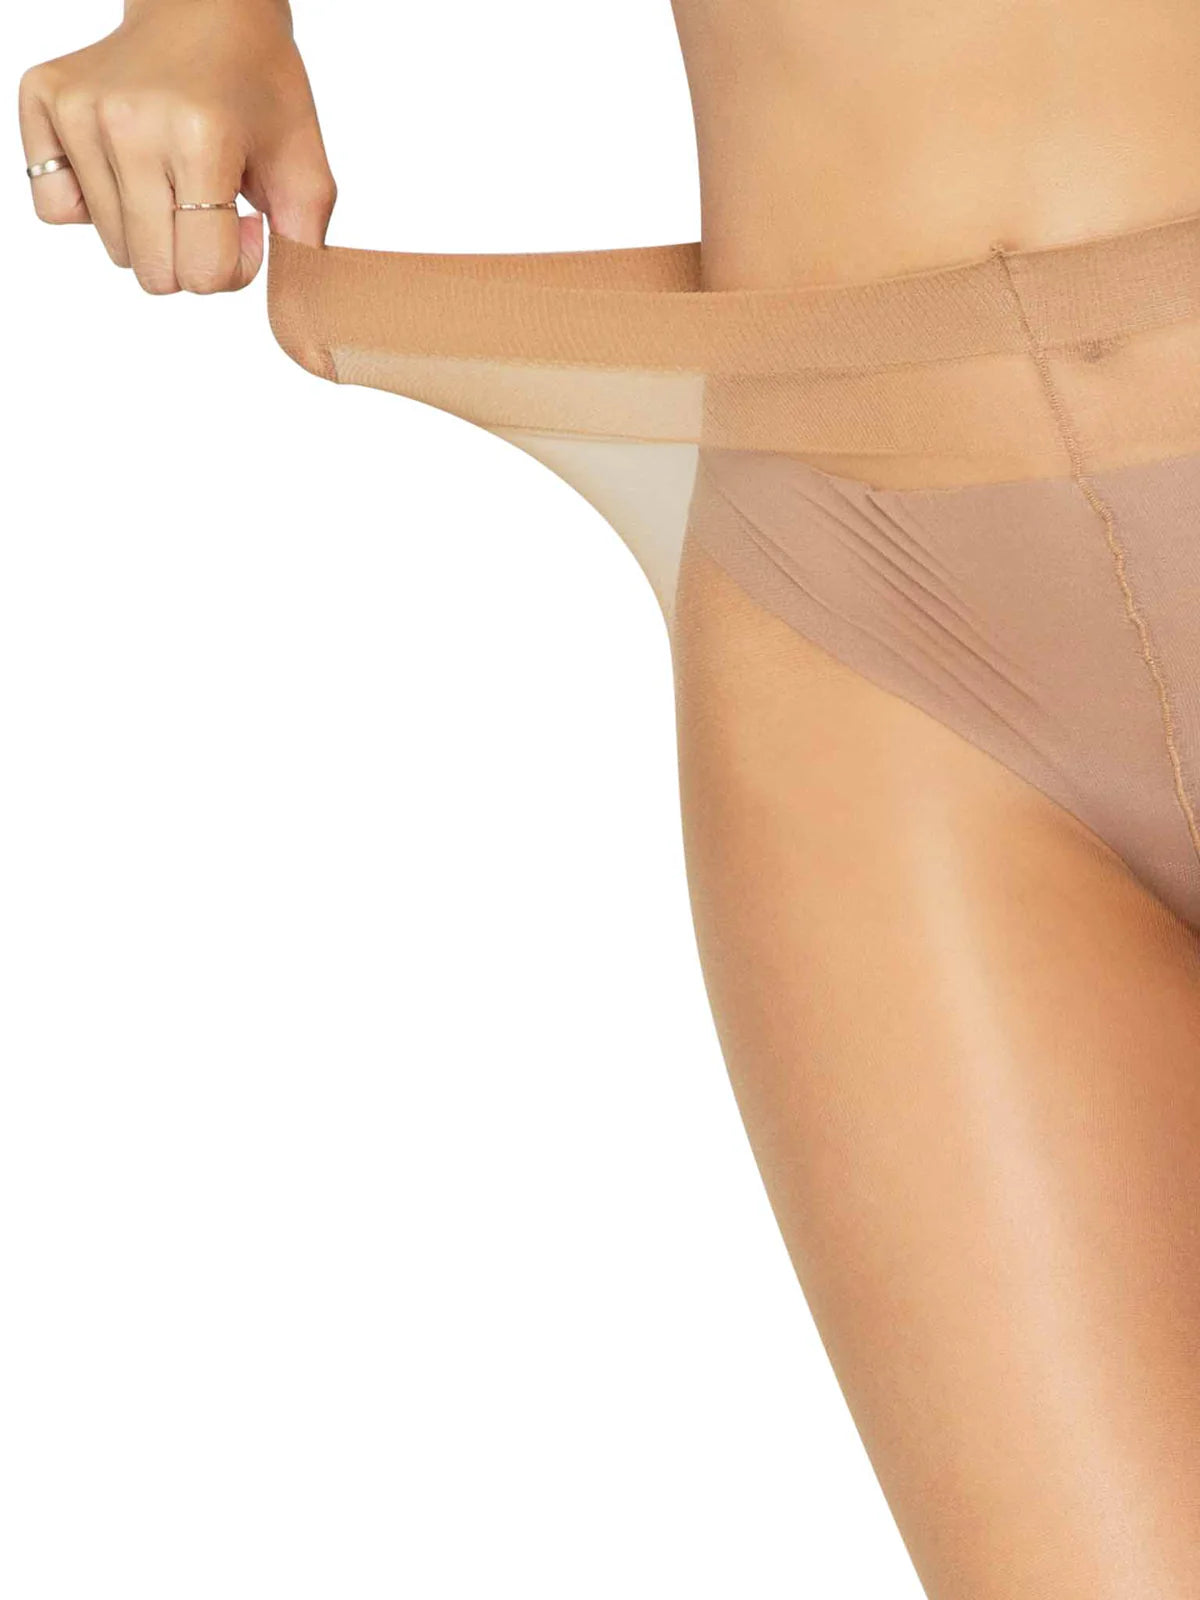 Spandex Sheer to Waist Support Pantyhose